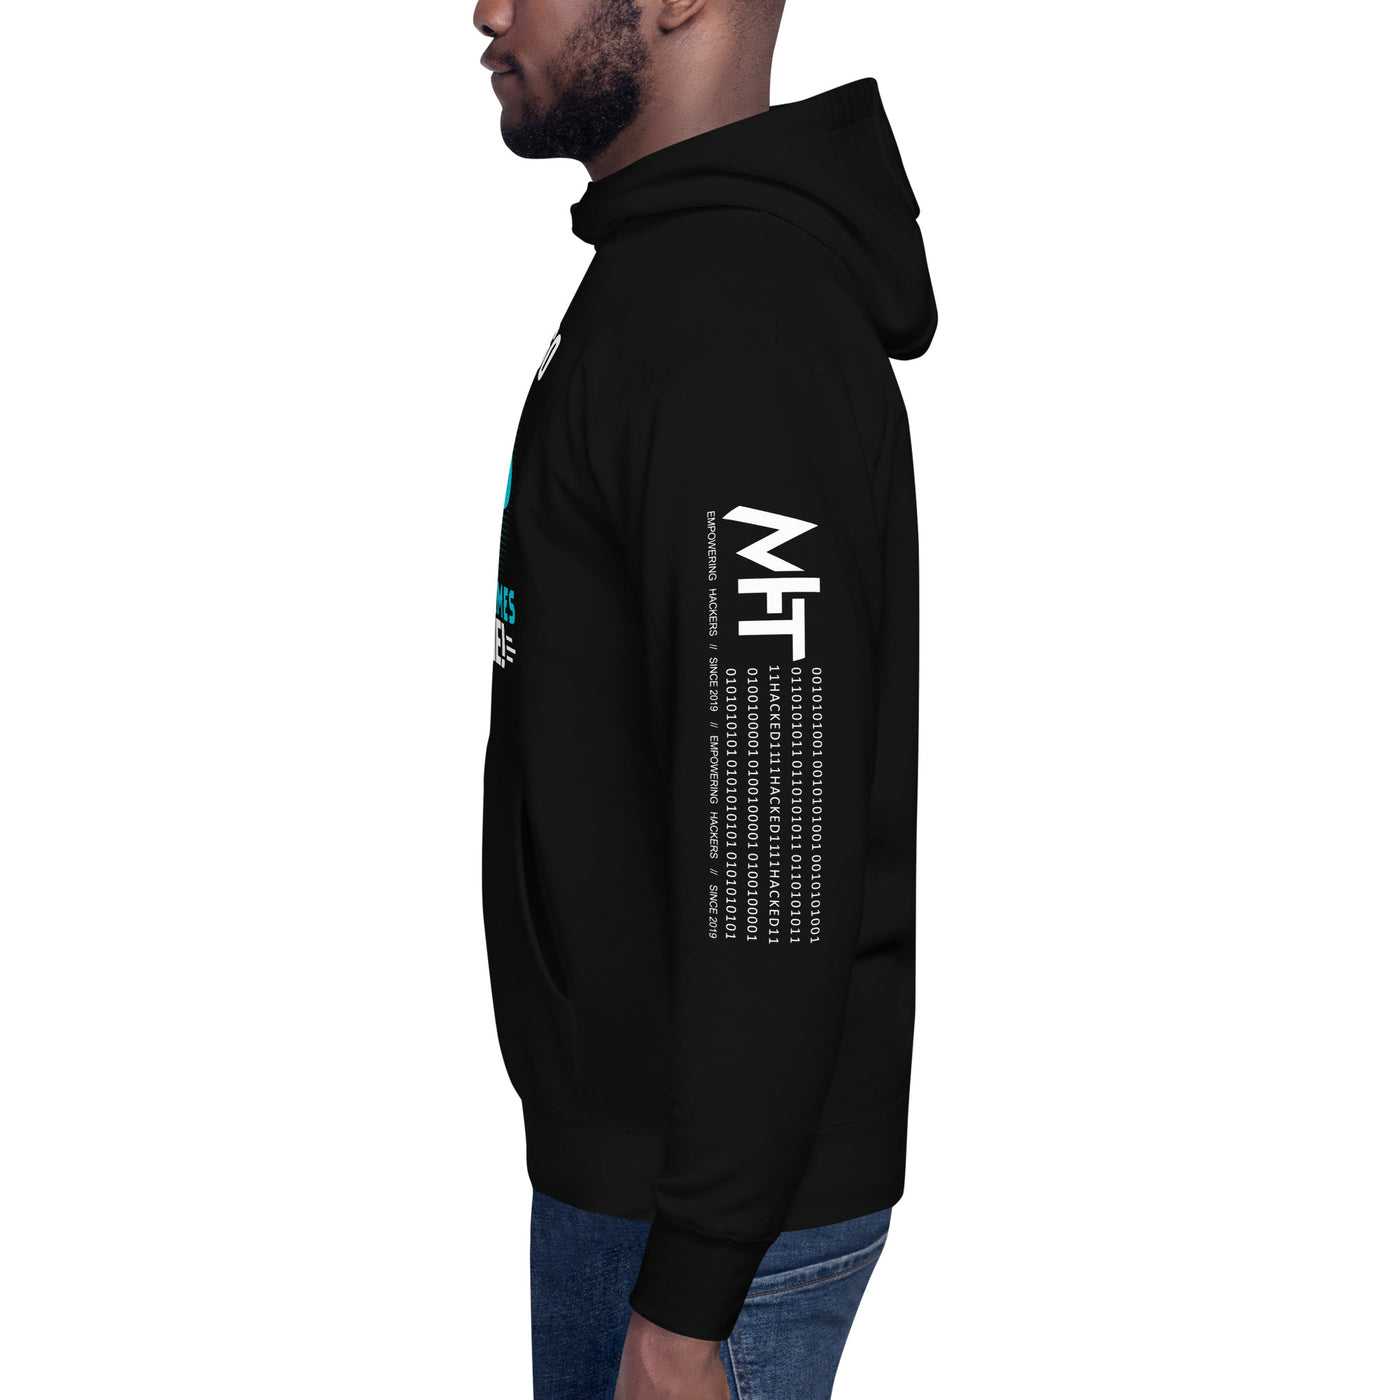 I must go, the Video Games need me Unisex Hoodie